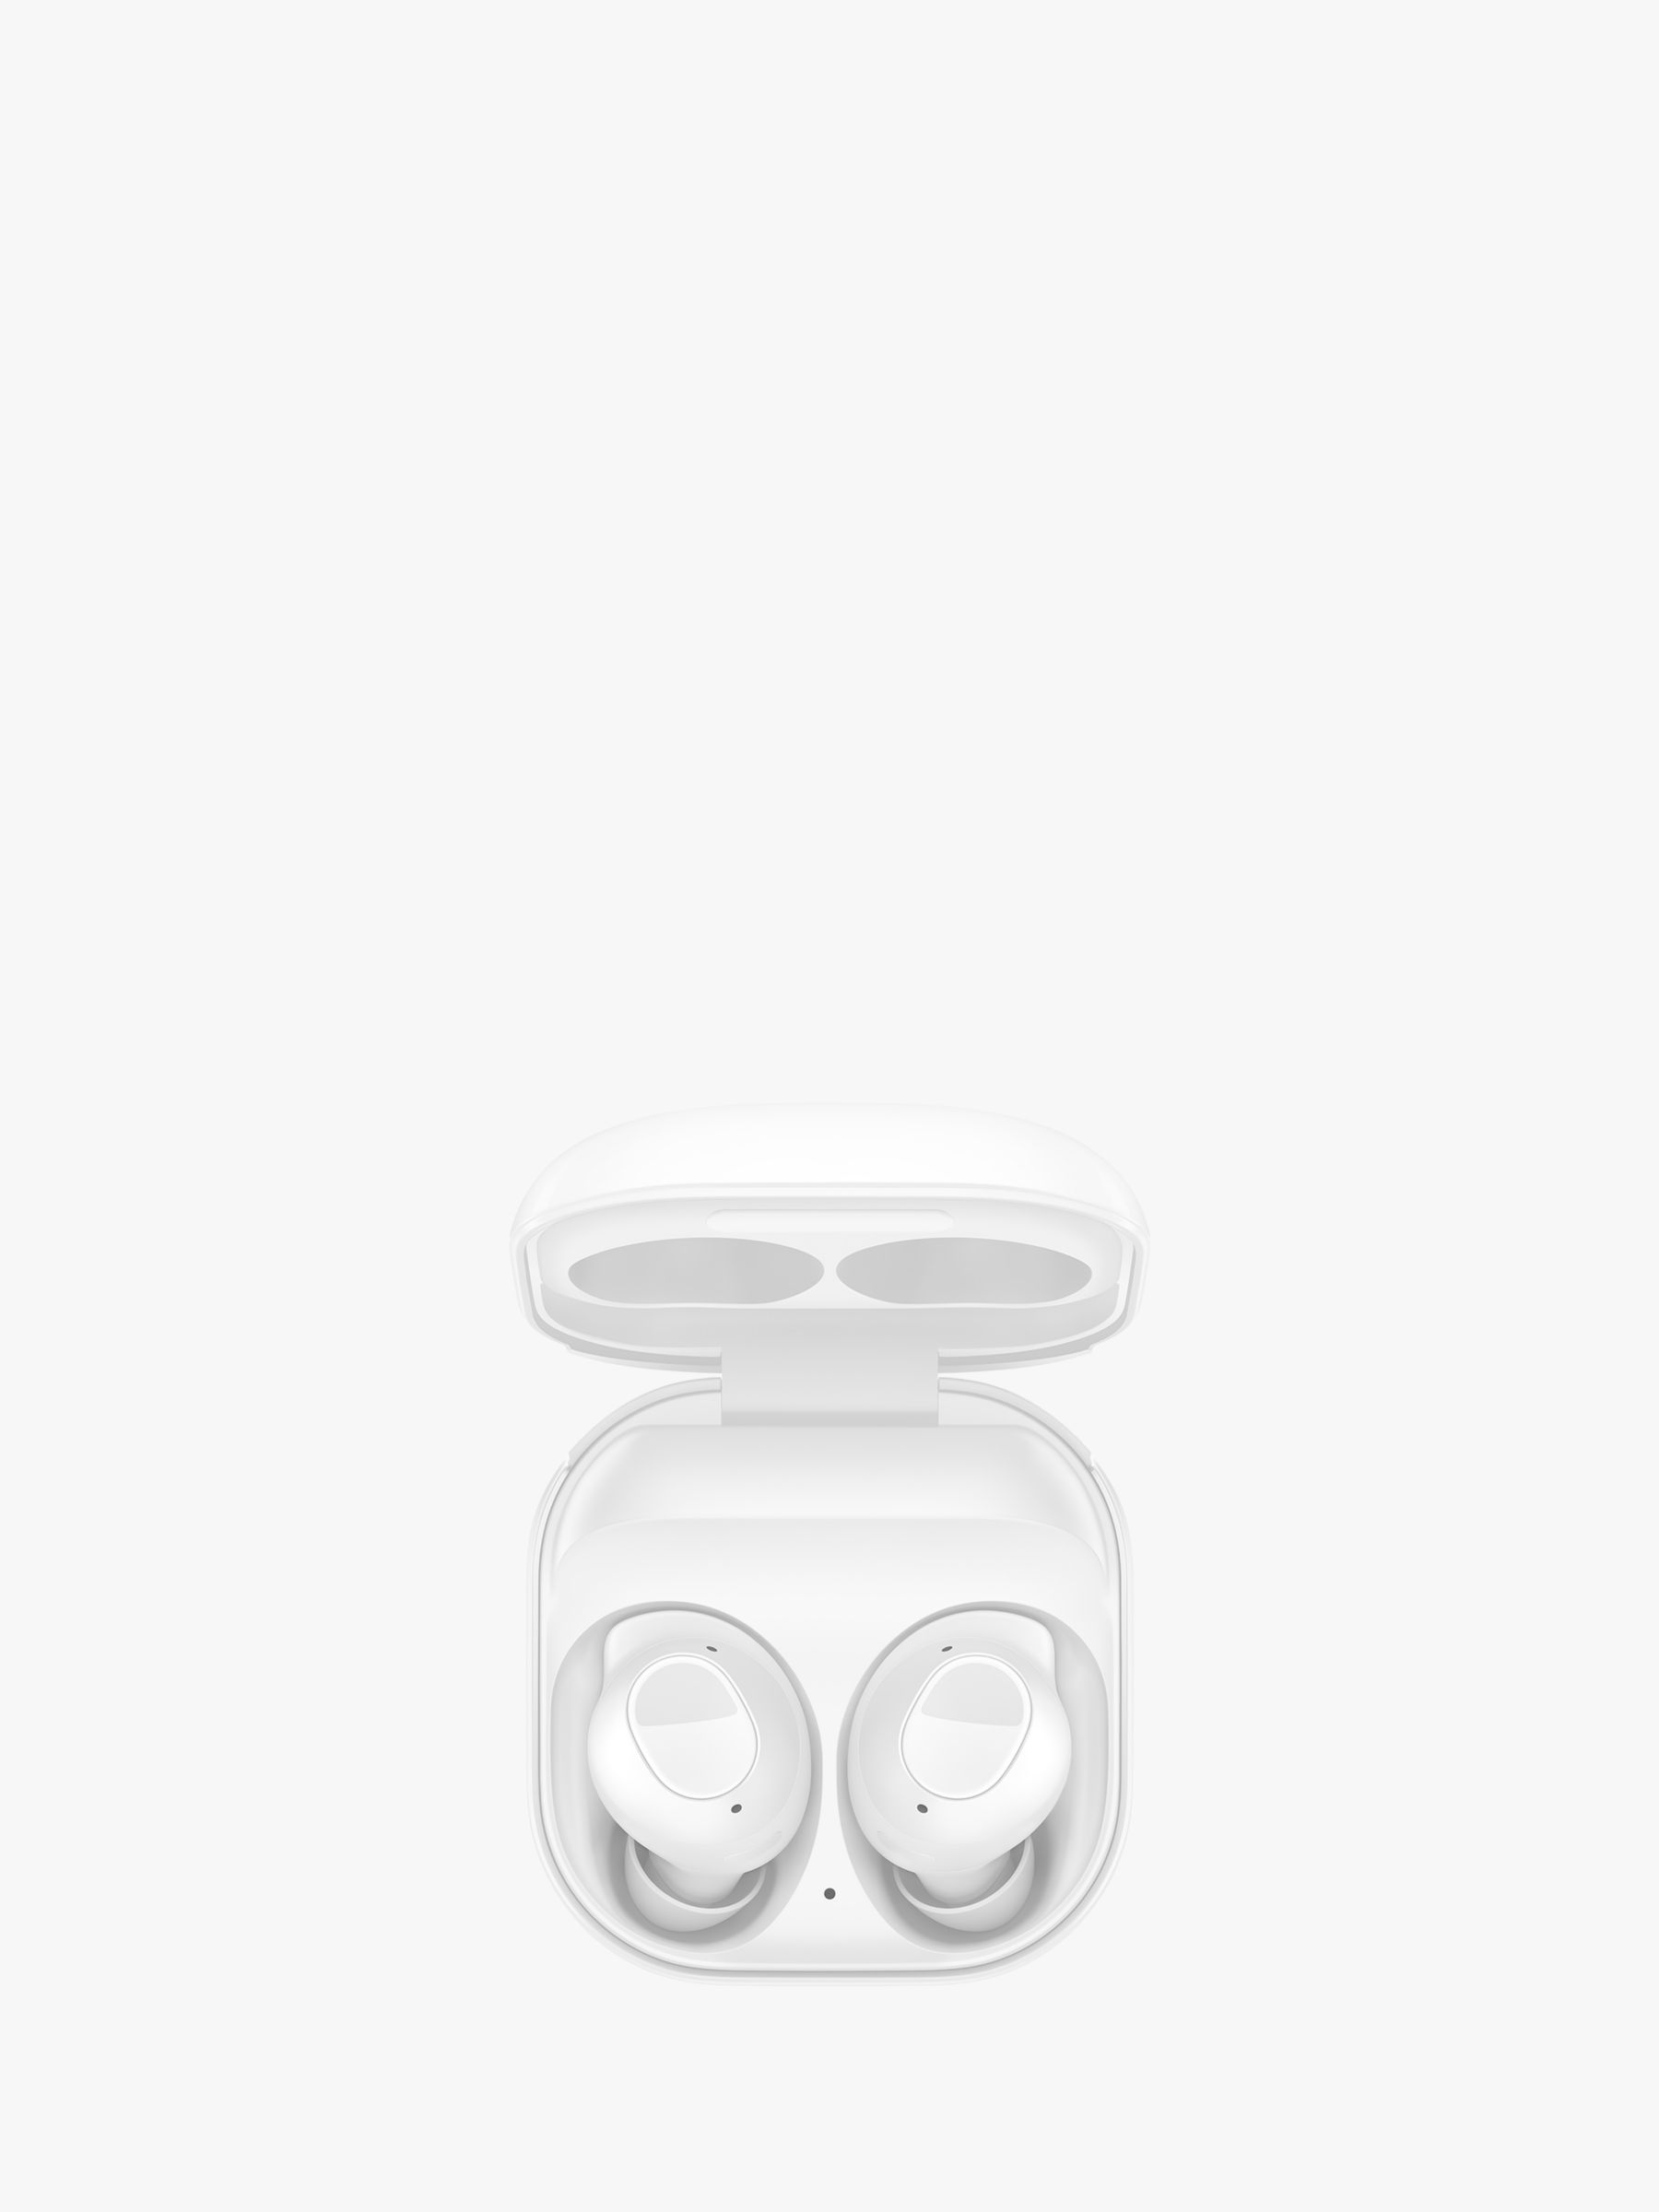 Samsung Galaxy Buds FE True Wireless Earbuds with Active Noise  Cancellation, White